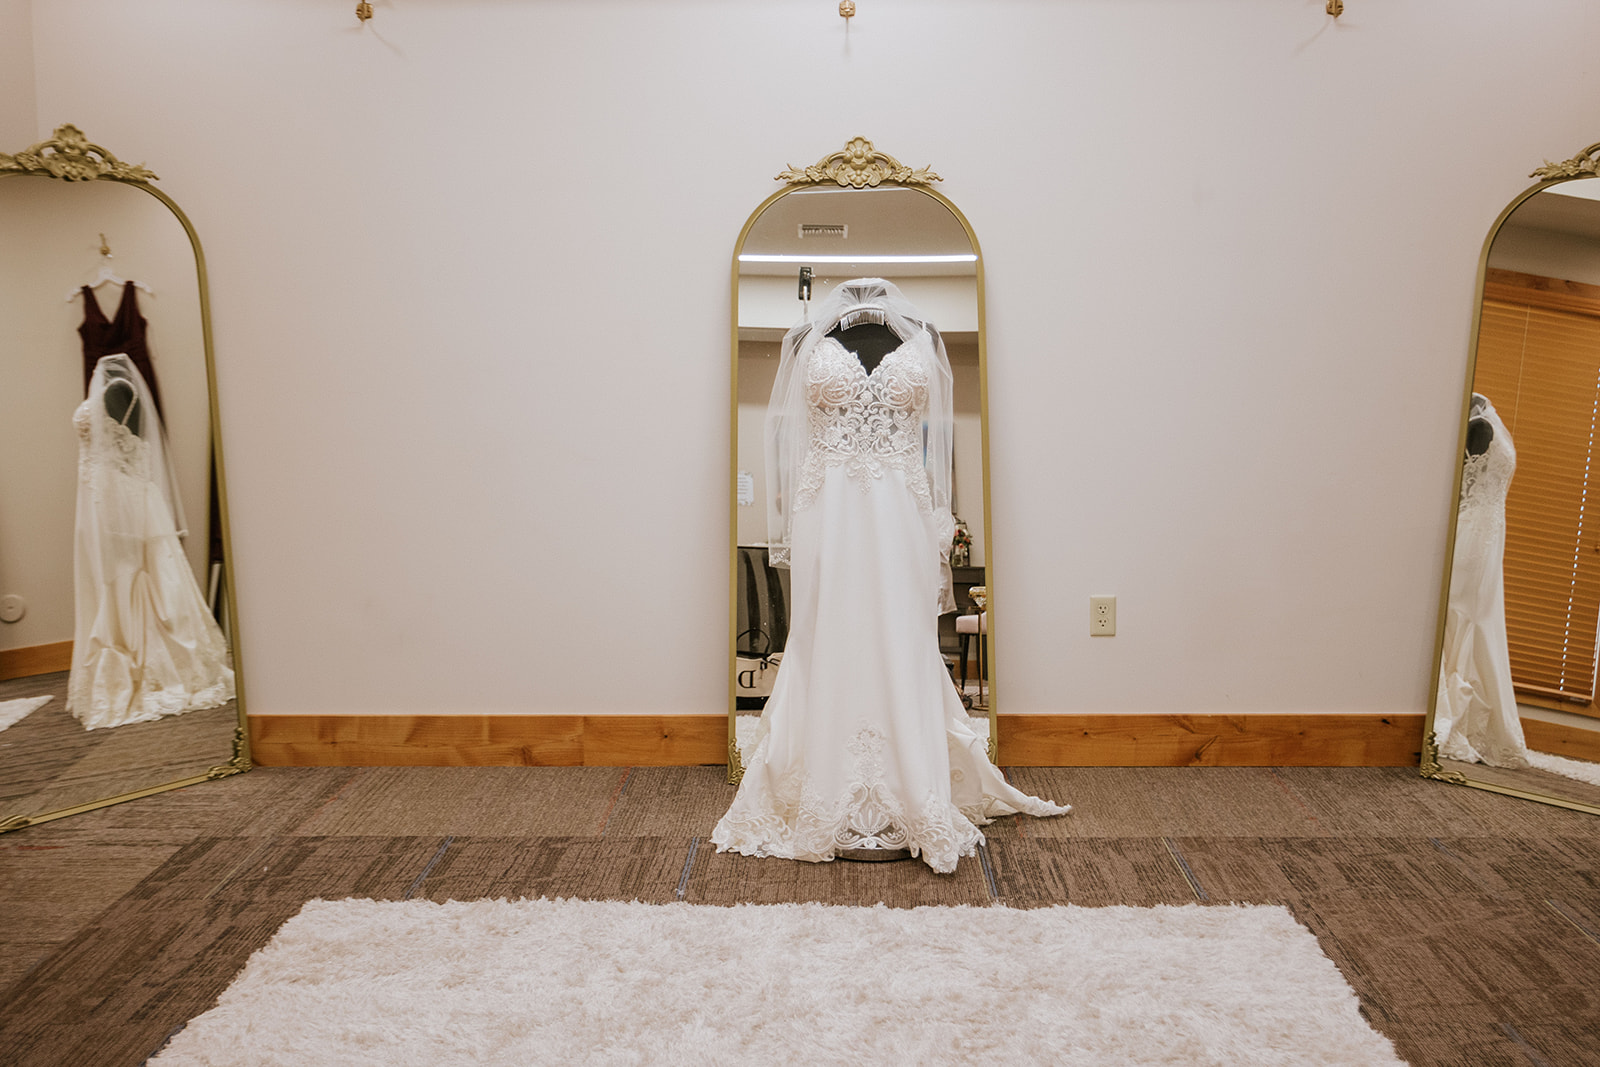 The bride's dress hanging on a mirror in her getting-ready room